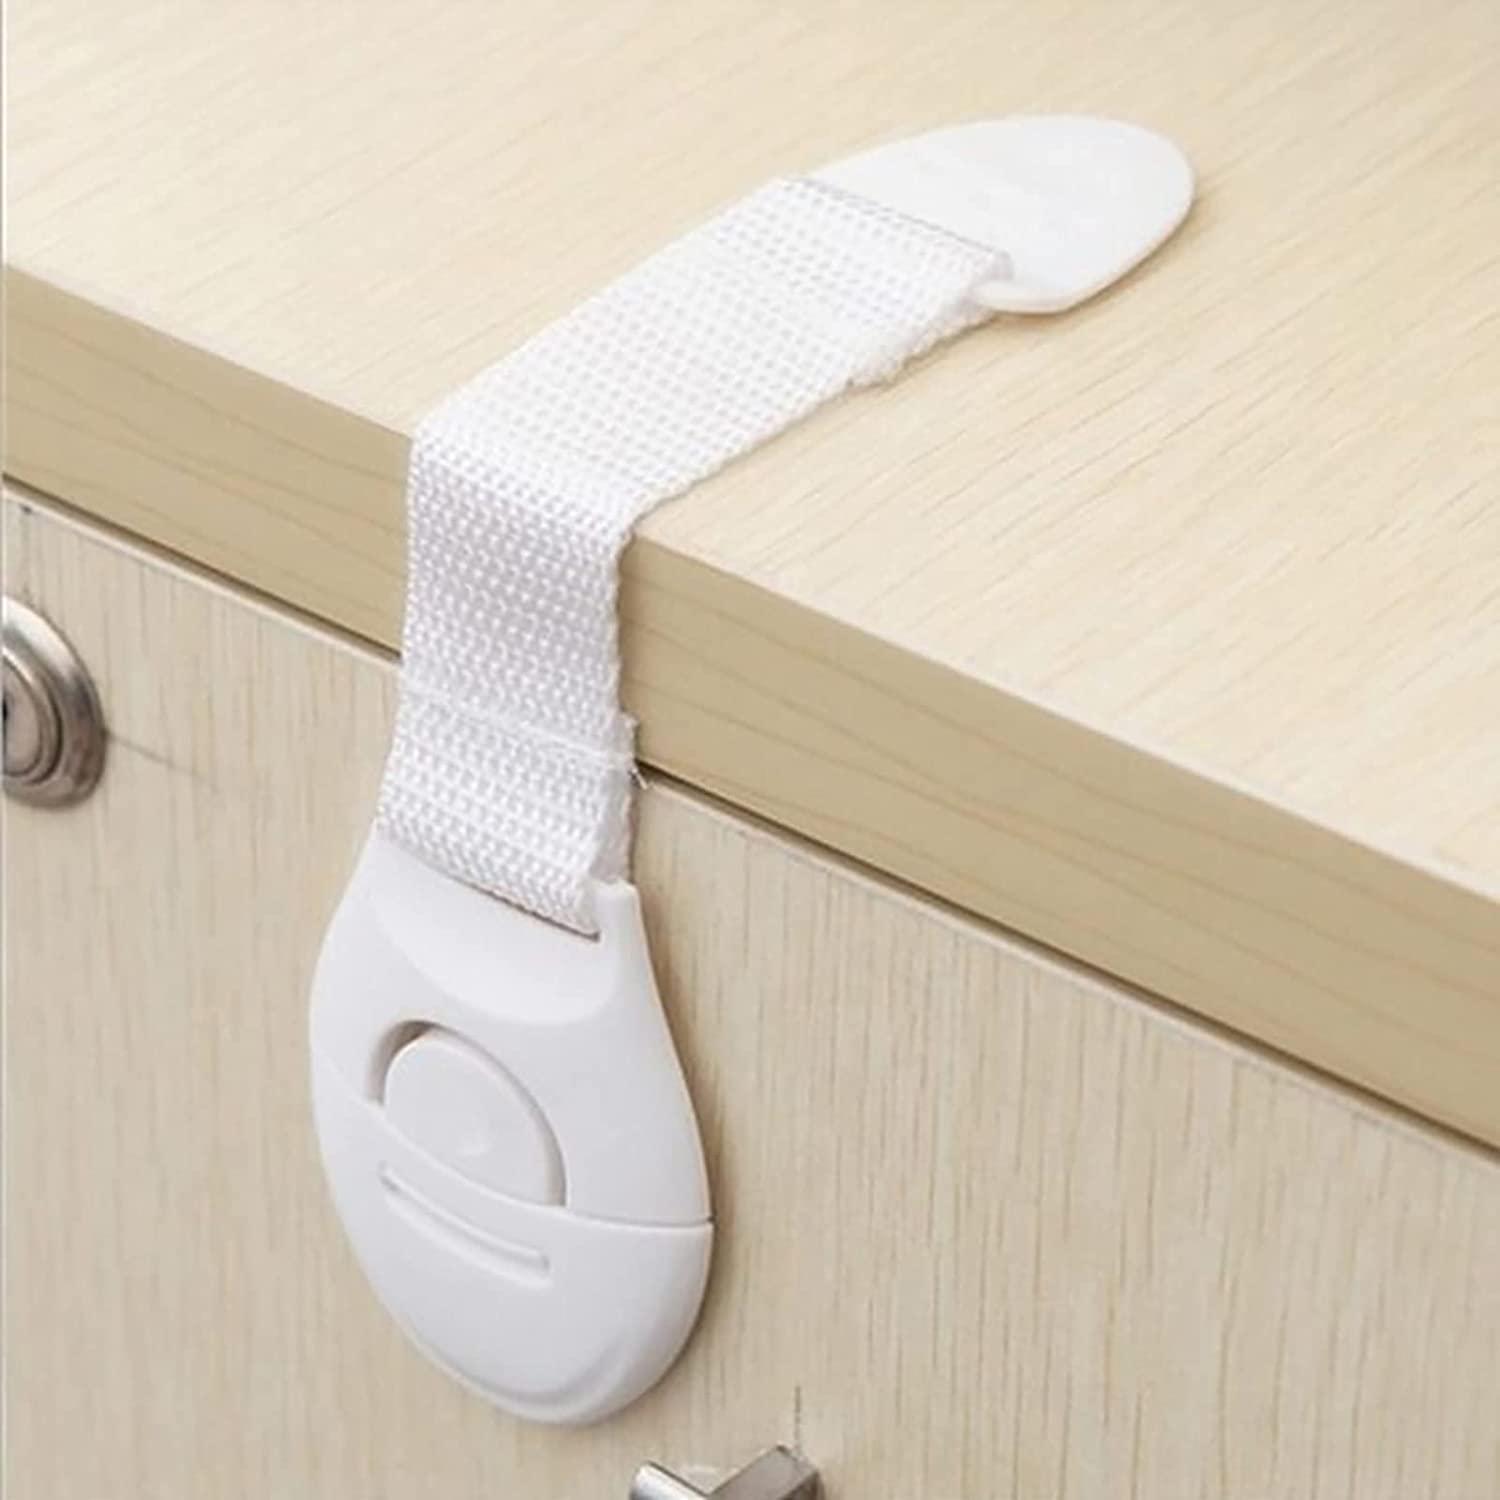 2/4/6pcs Child Safety Cabinet Locks Adjustable Straps for Drawers  Refrigerator Toilet For Kids Baby Safety Security Protection